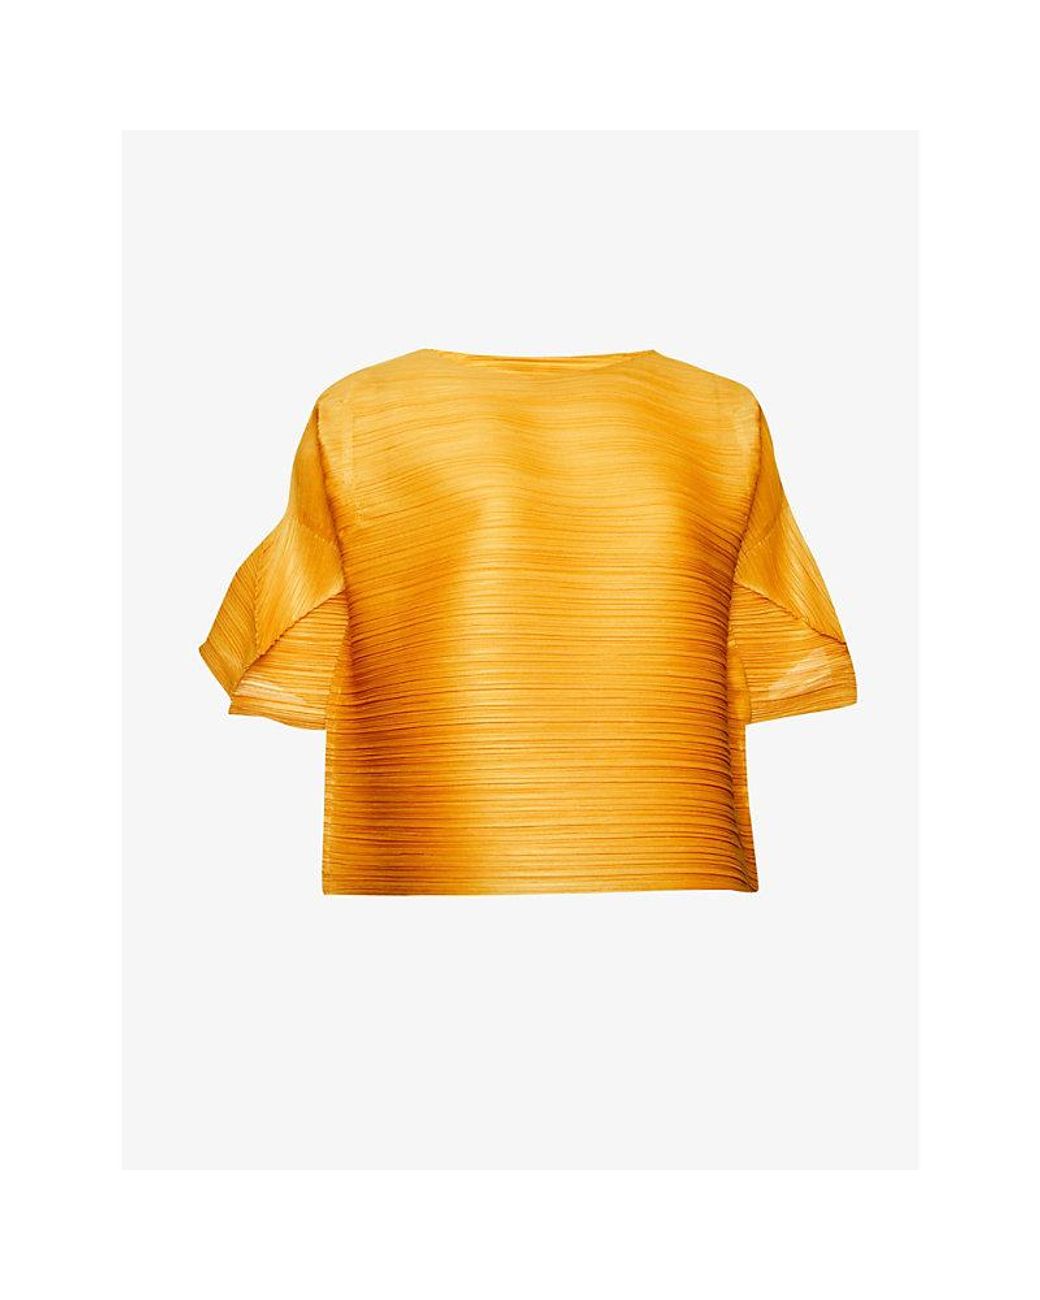 Pleats Please Issey Miyake Tour Pleated Woven Top in Yellow | Lyst